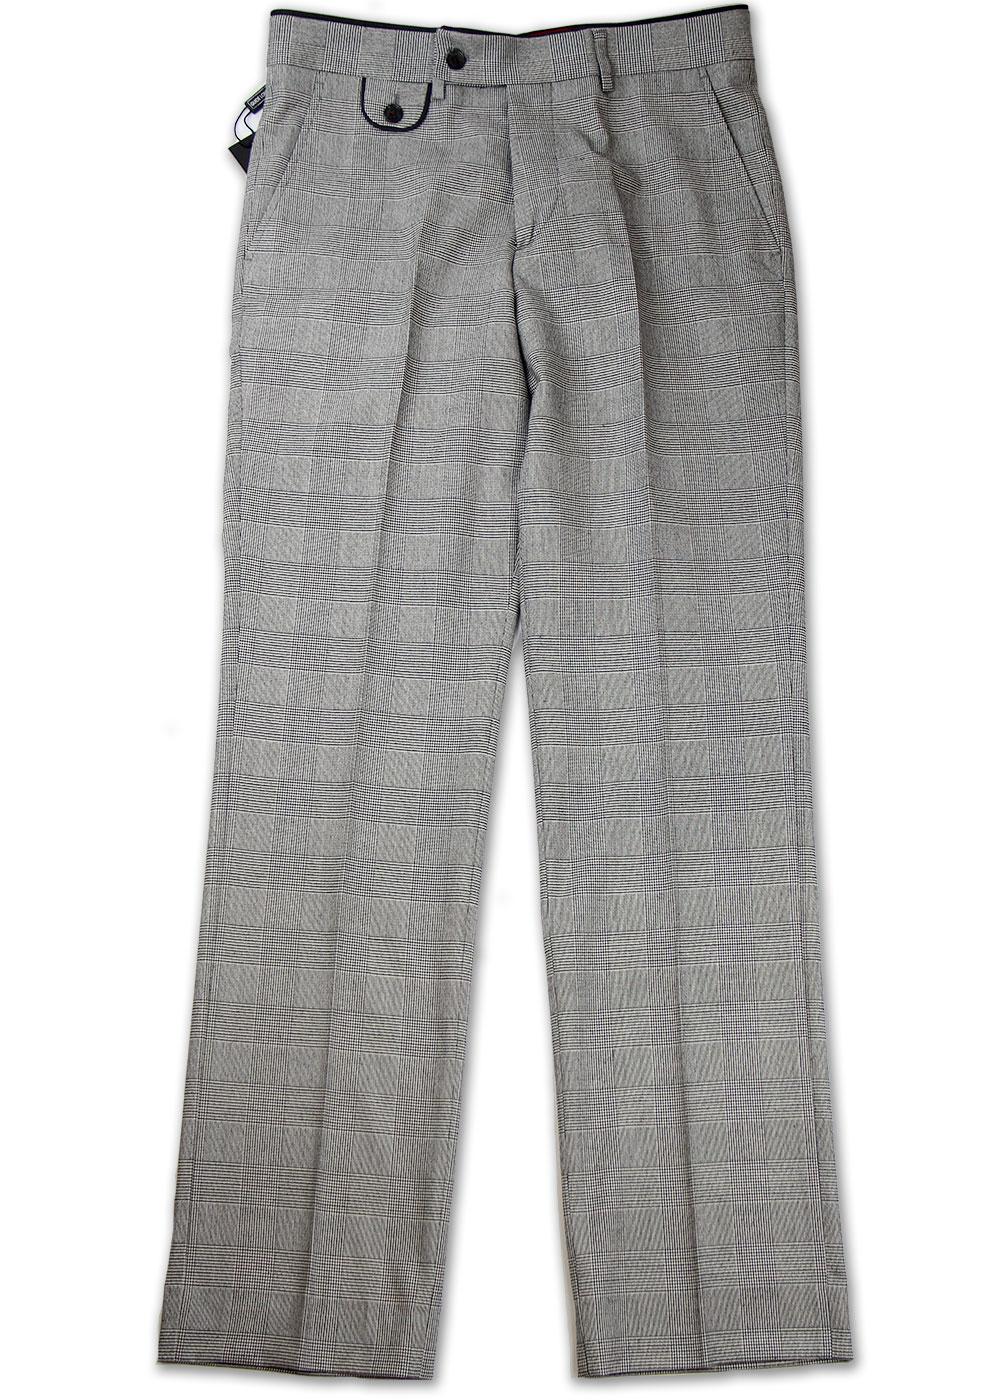 GUIDE LONDON Mens Retro Mod Prince of Wales Check Trousers